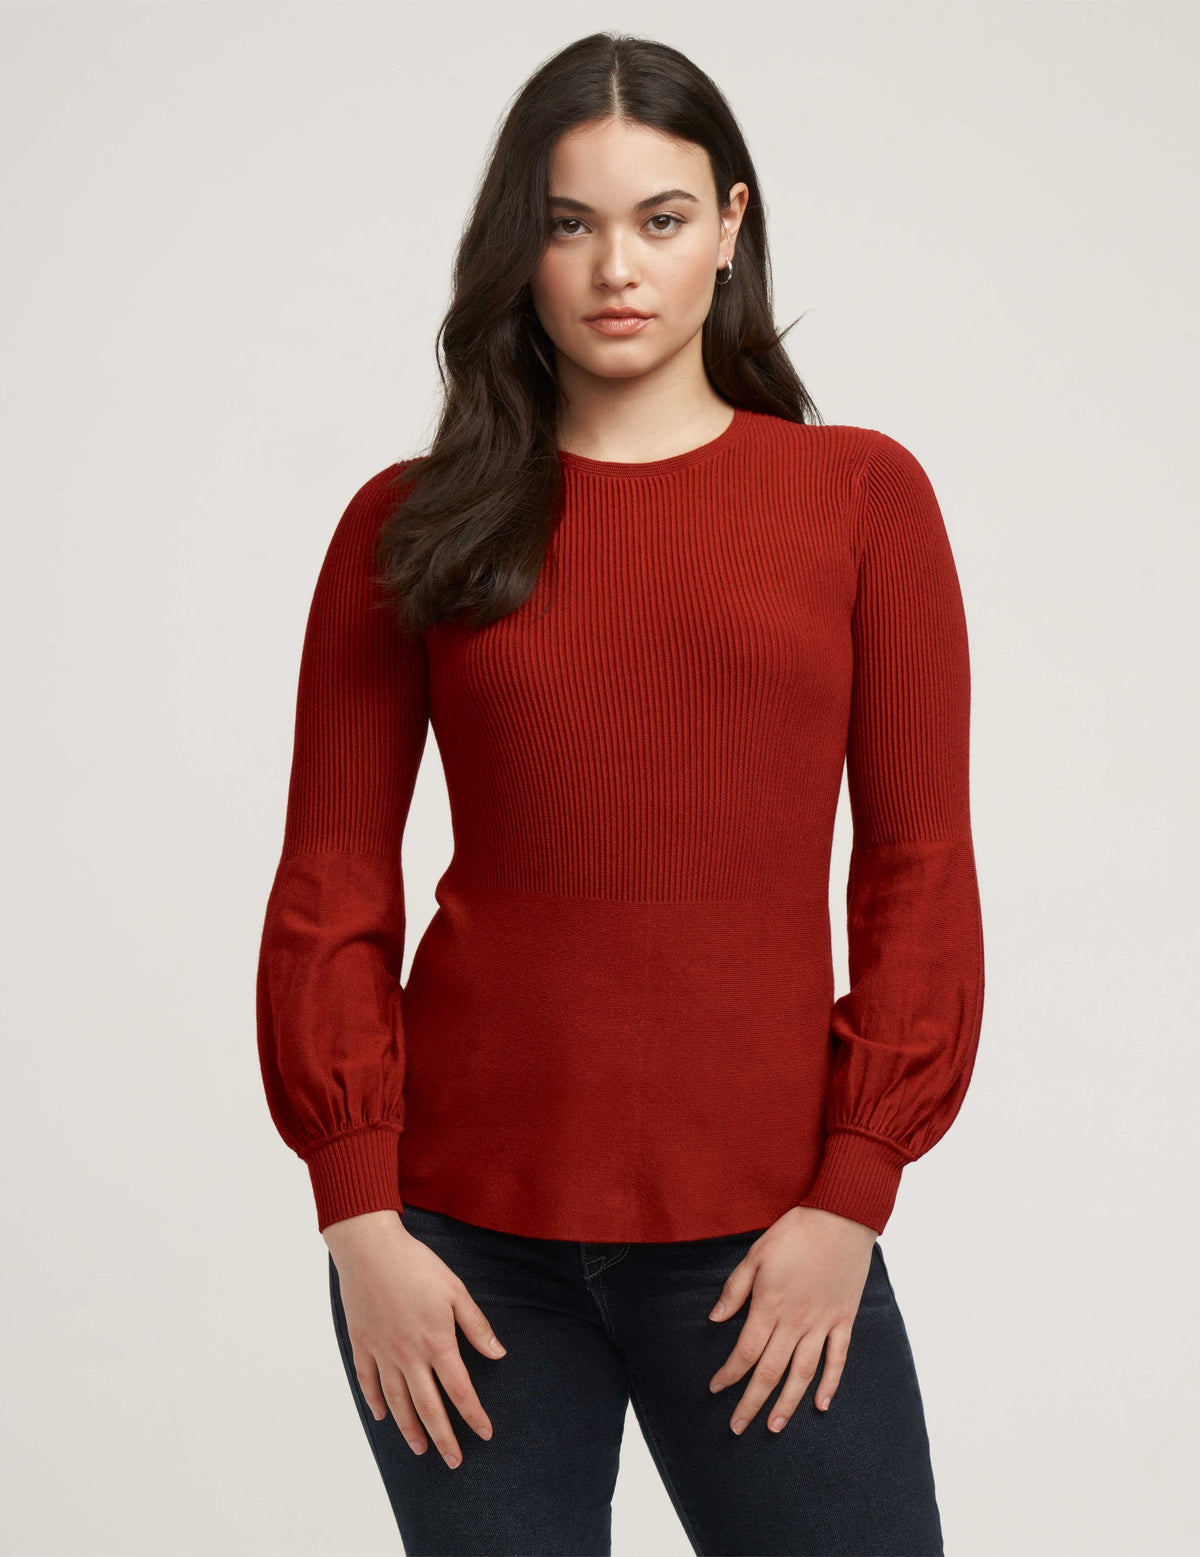 Anne Klein Titian Red Balloon Sleeve Sweater- Clearance